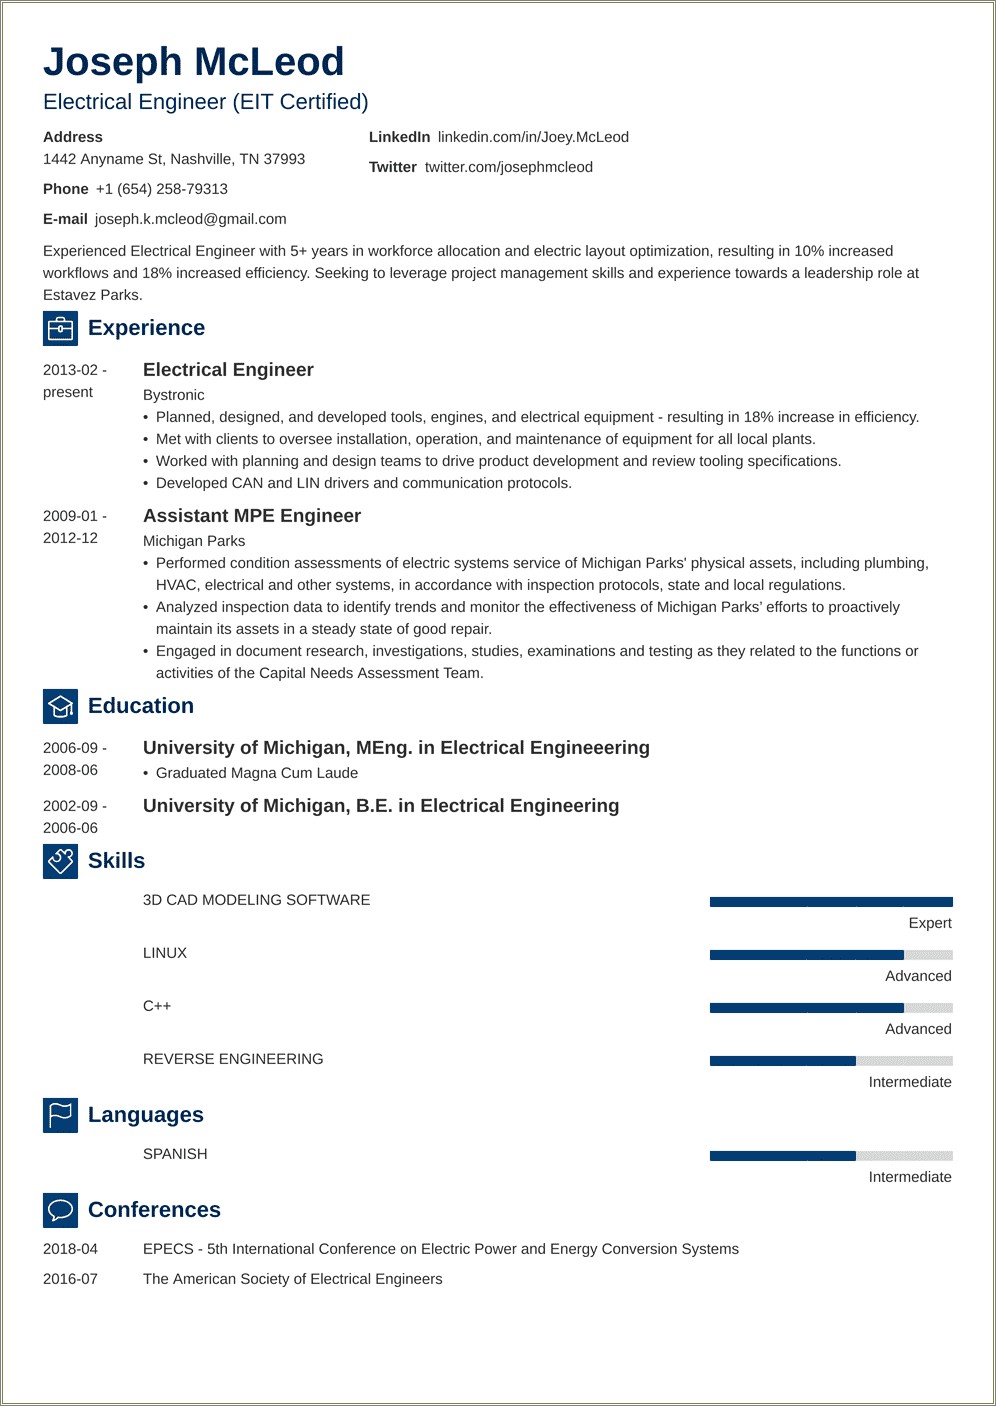 Resume For Electrical Engineer With 4 Years Experience